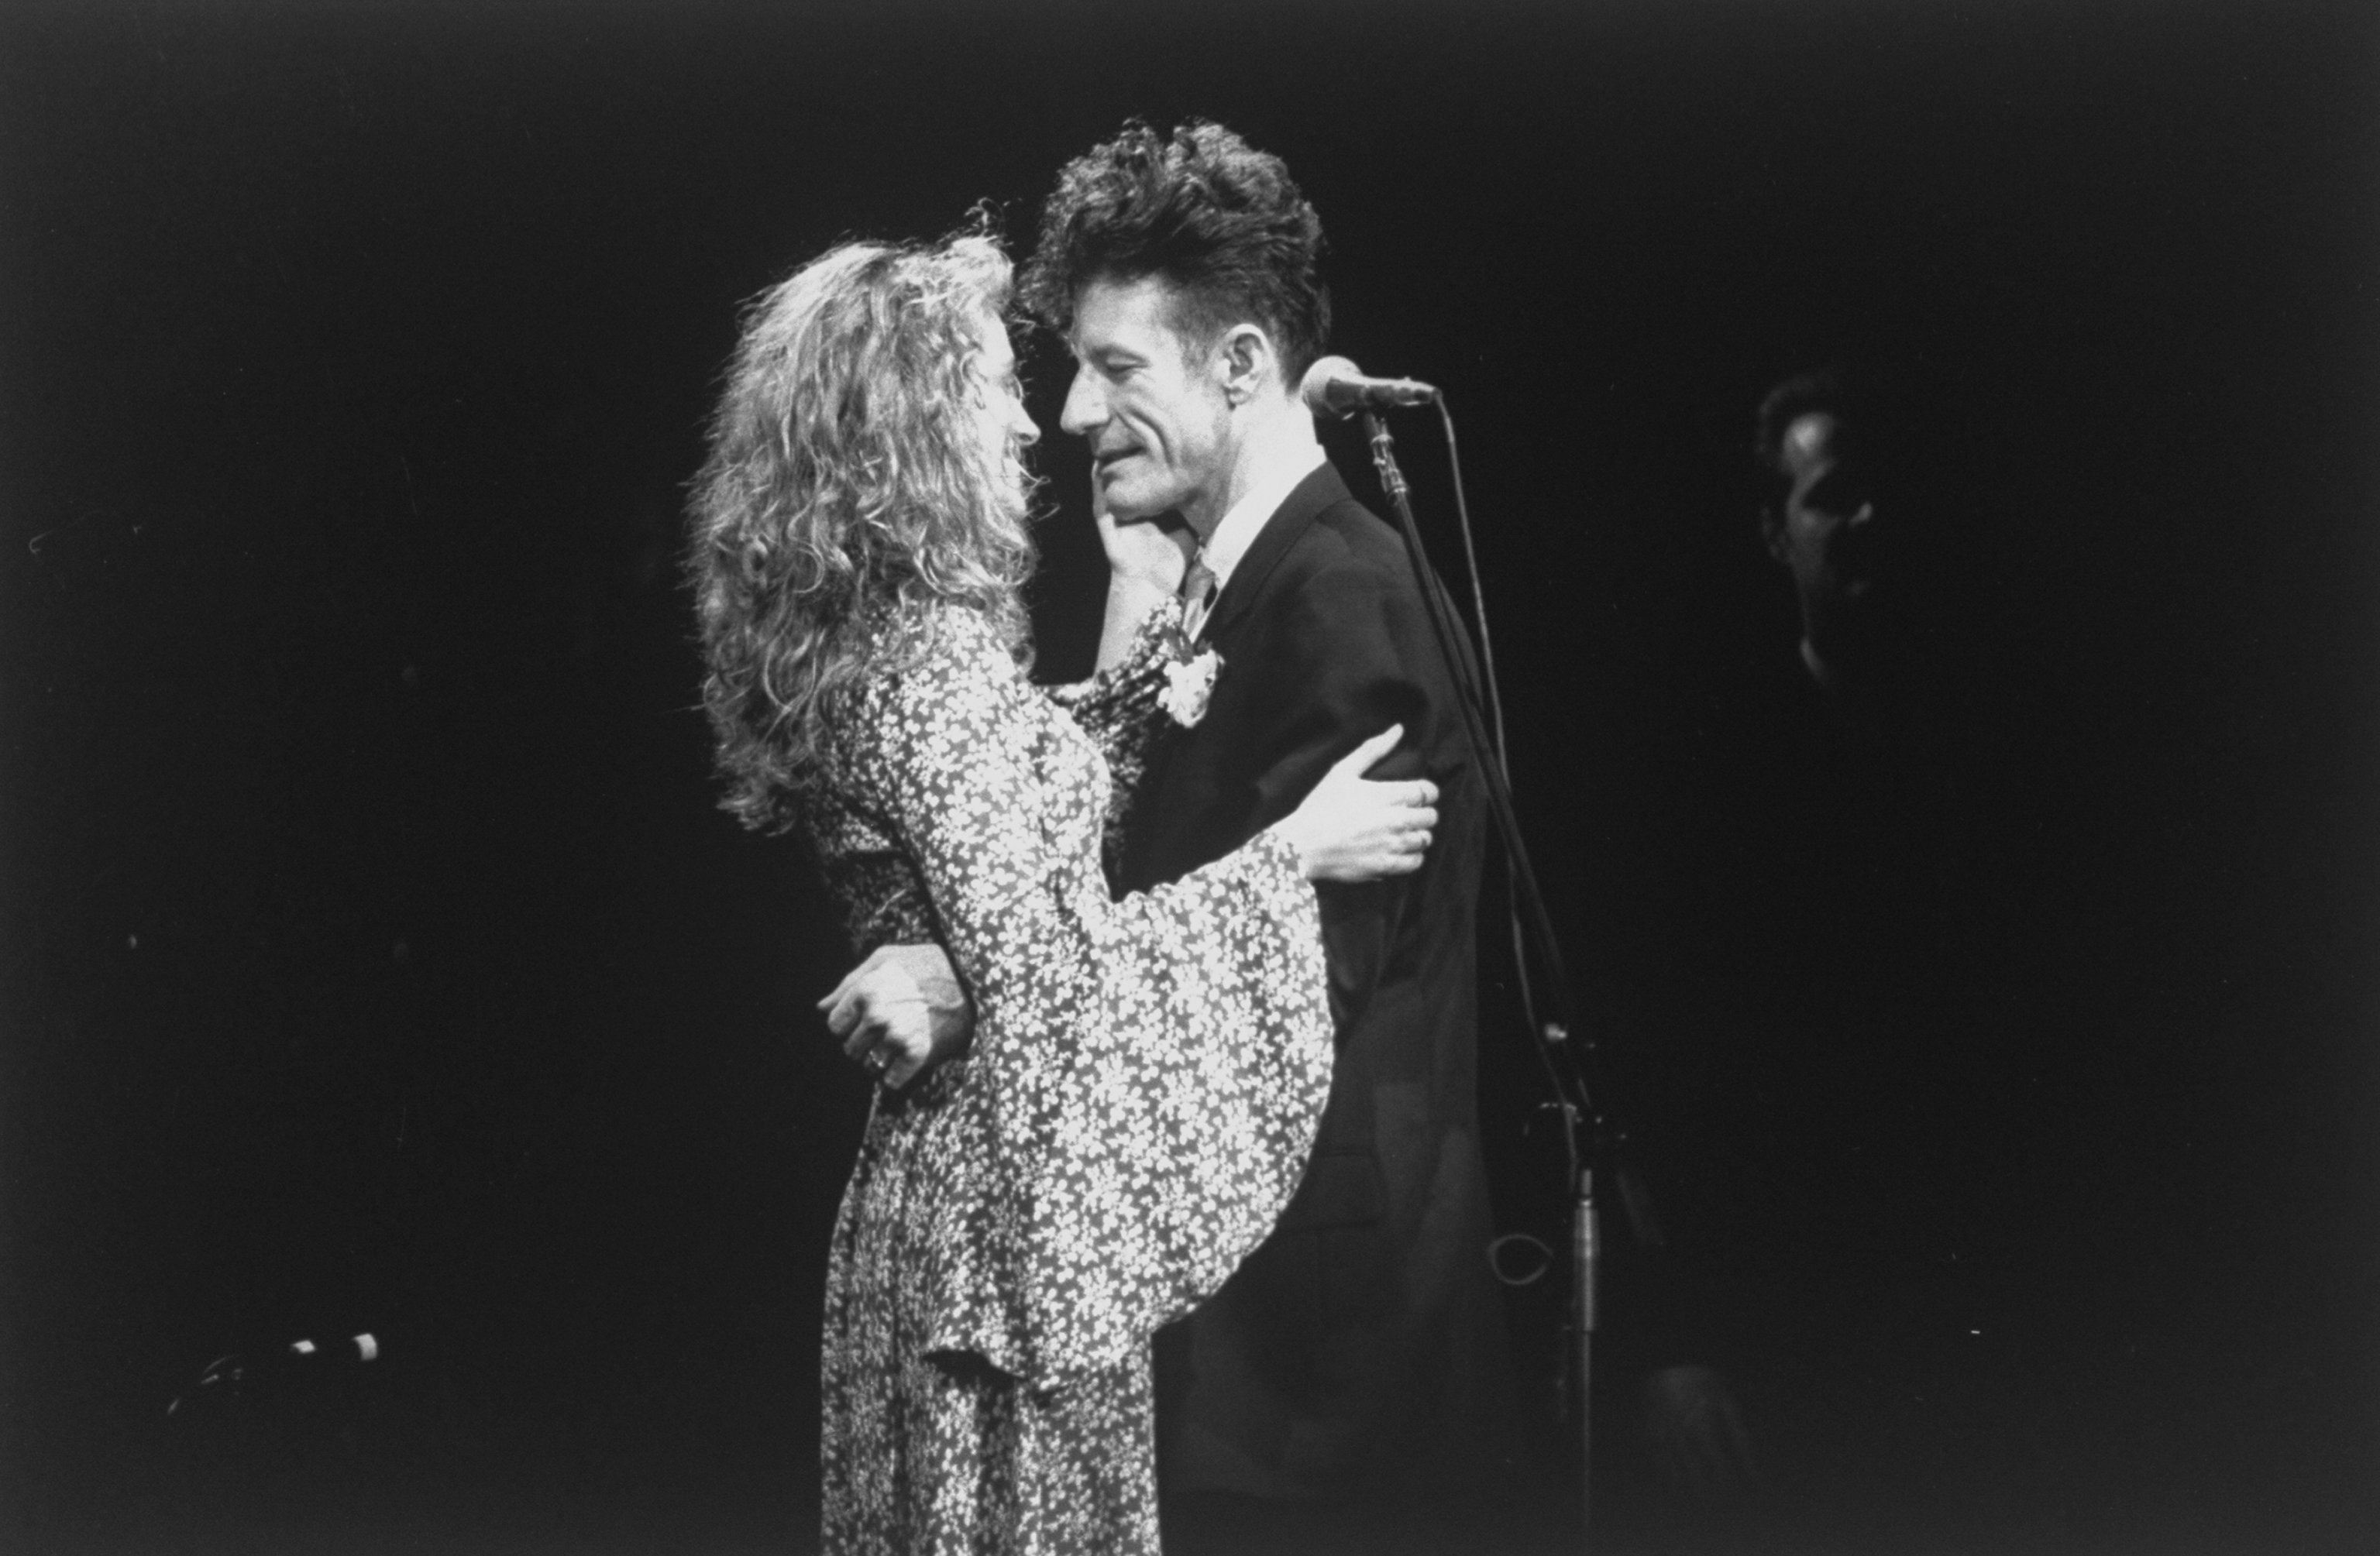 Julia Roberts and her husband Lyle Lovett embracing during his concert on the night of their wedding day in July 1993. / Source: Getty Images